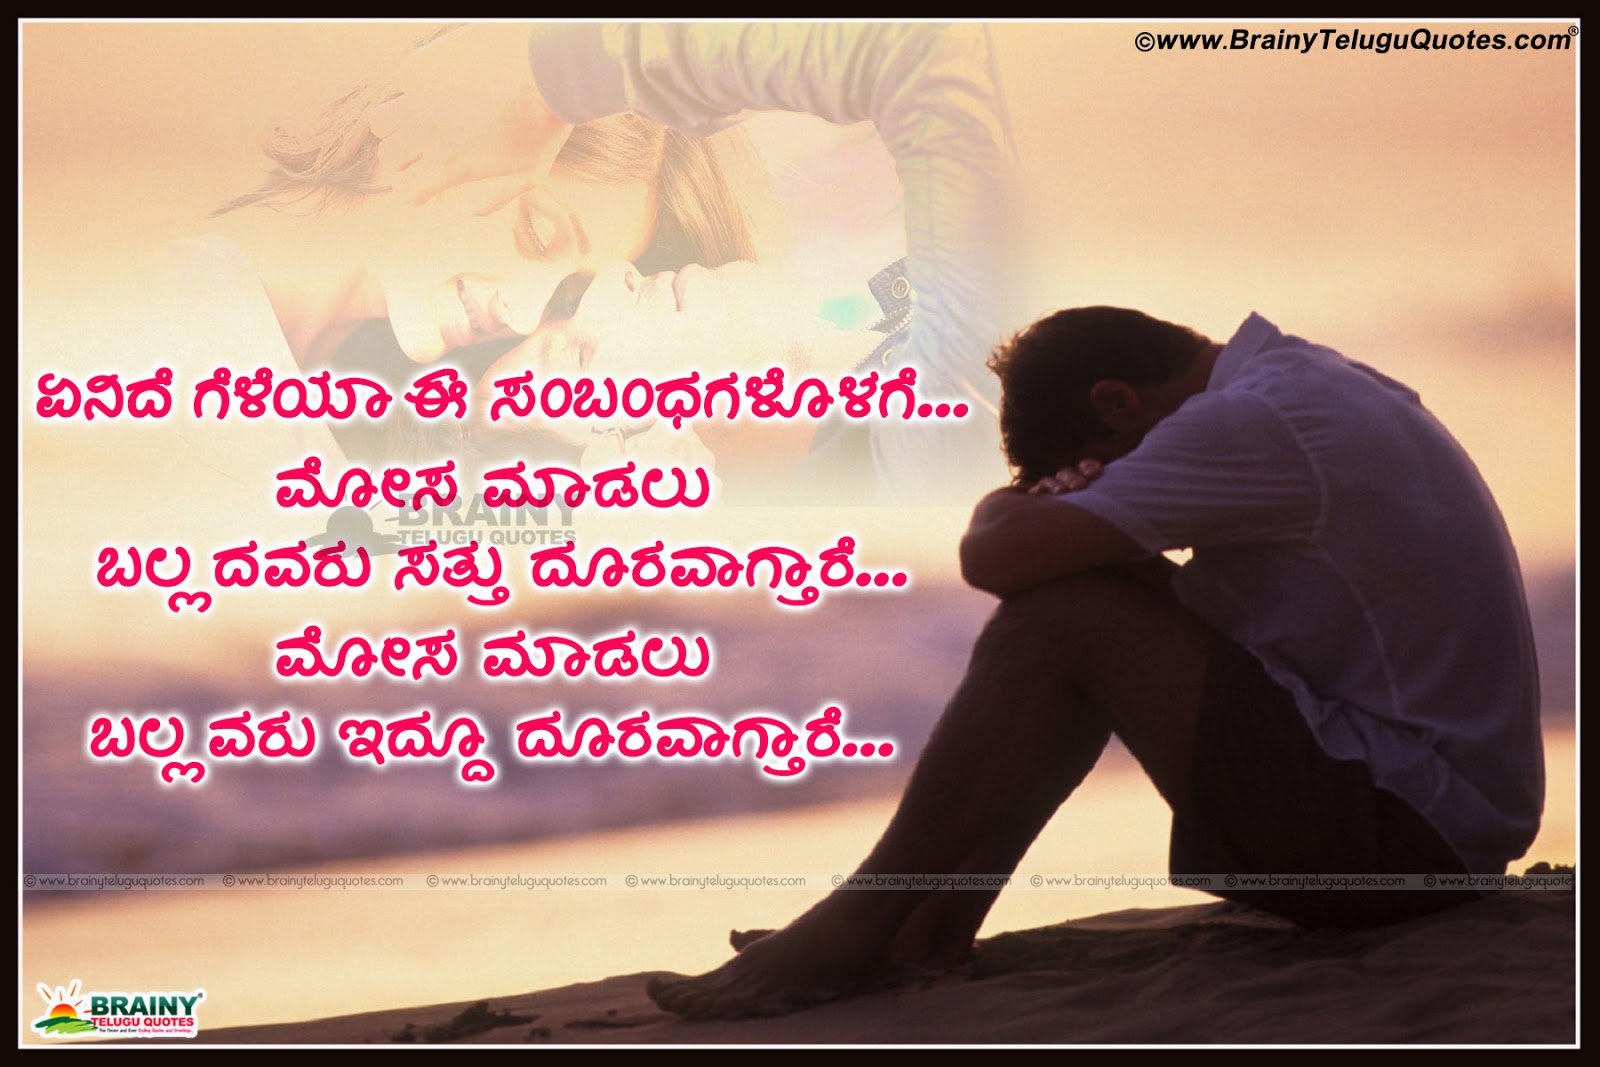 Sad Quotes In Kannada Language Kannada love failure quotes and miss you images